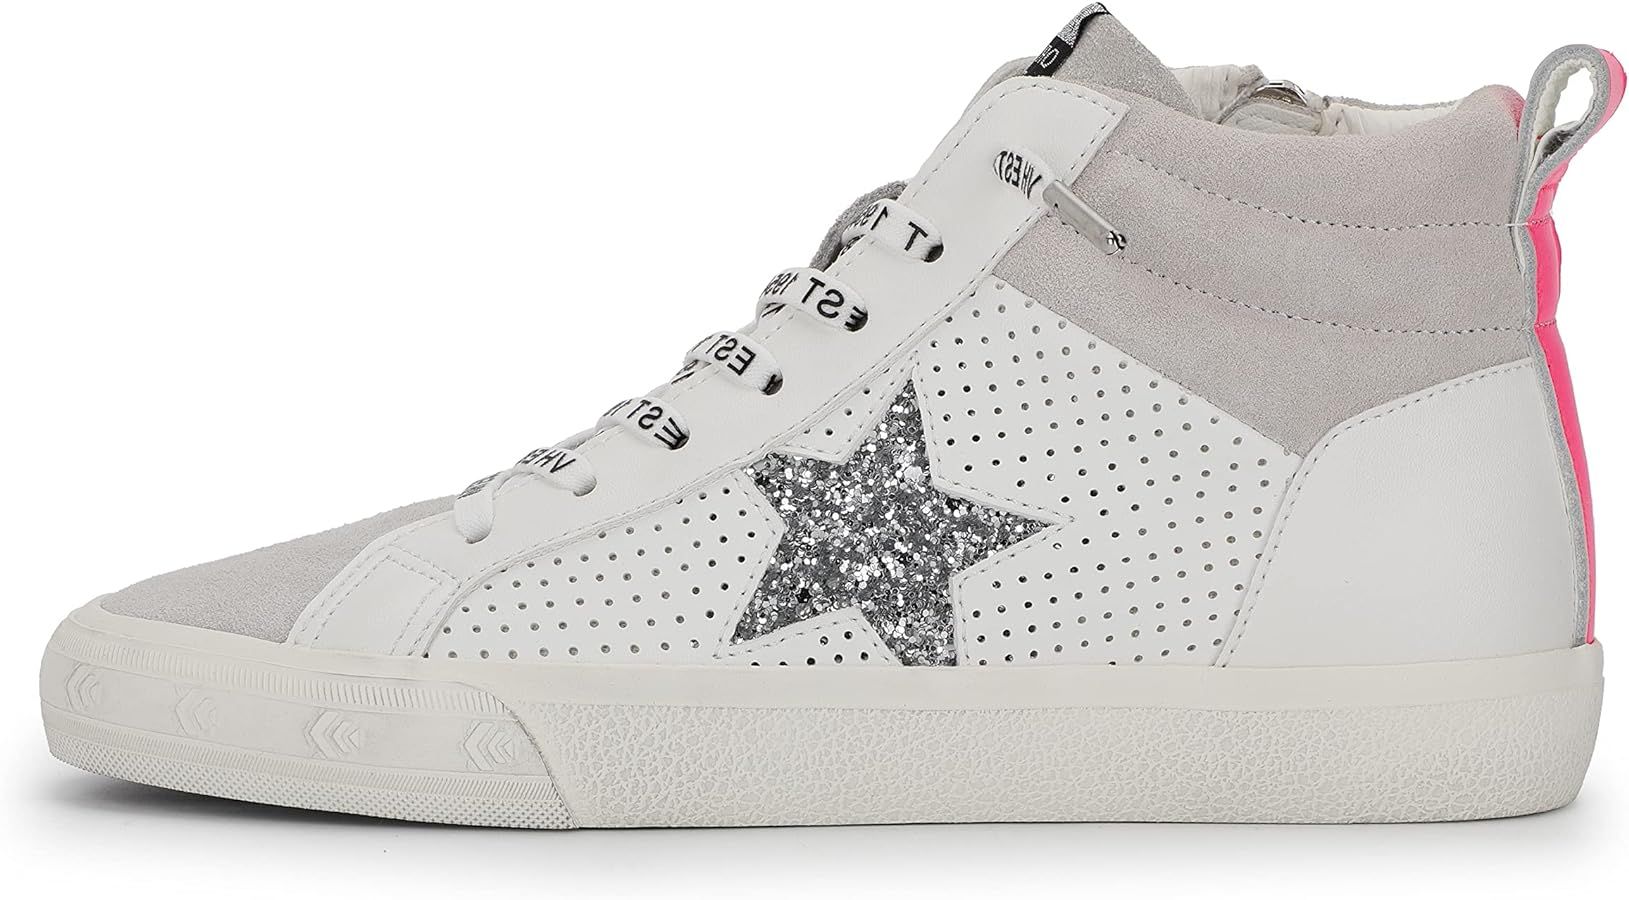 VINTAGE HAVANA Womens Lester Star Perforated High Sneakers Shoes Casual - Grey | Amazon (US)